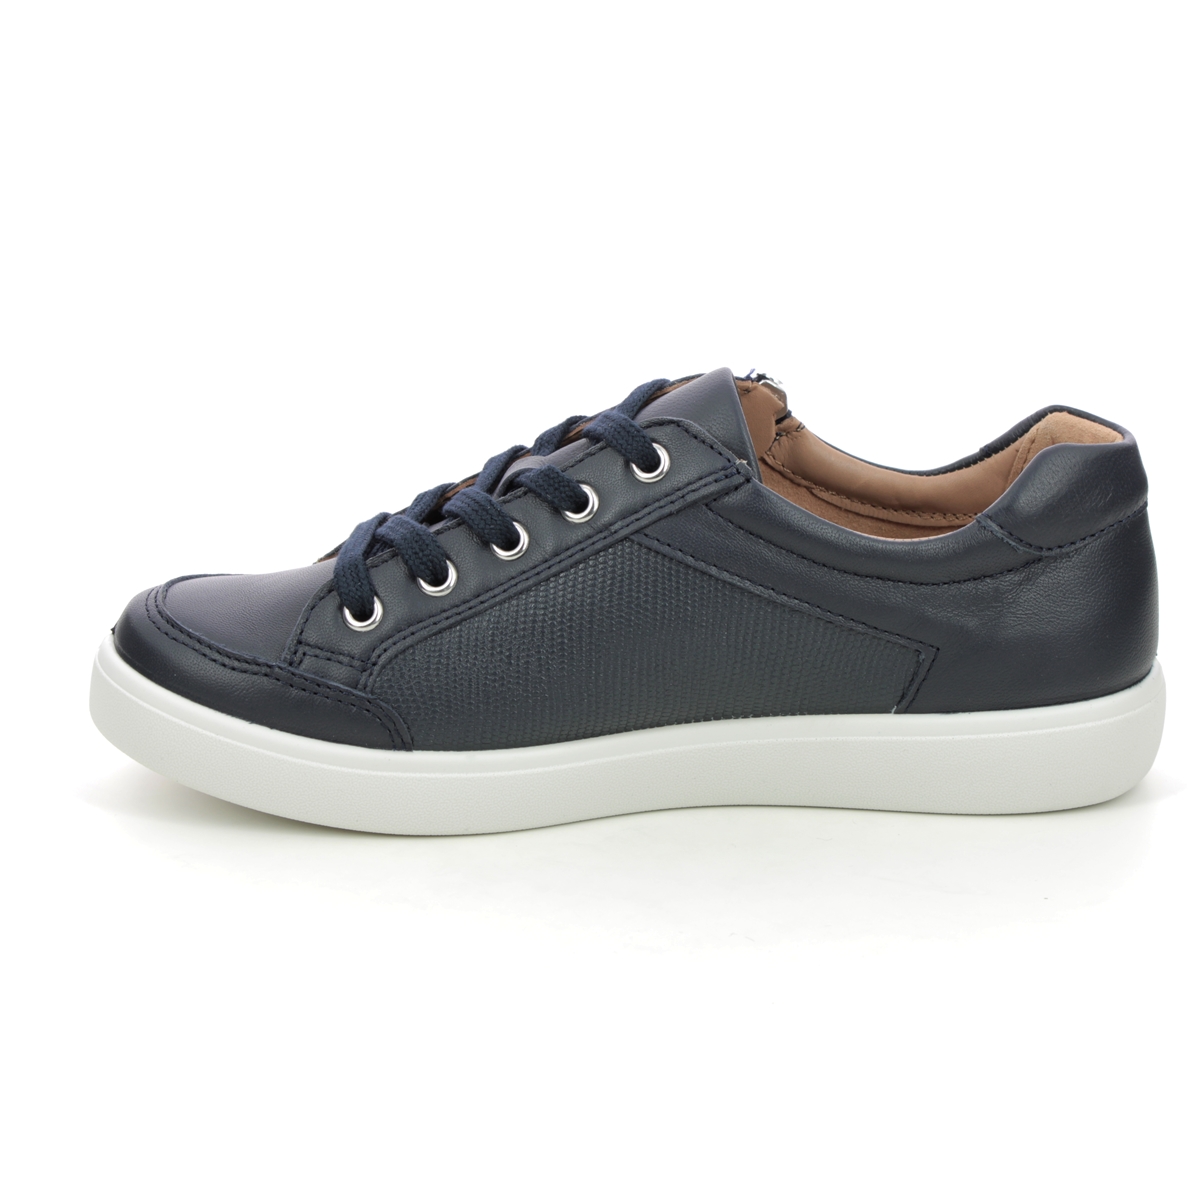 Hotter Chase 2 Wide 16112-71 Navy Leather trainers